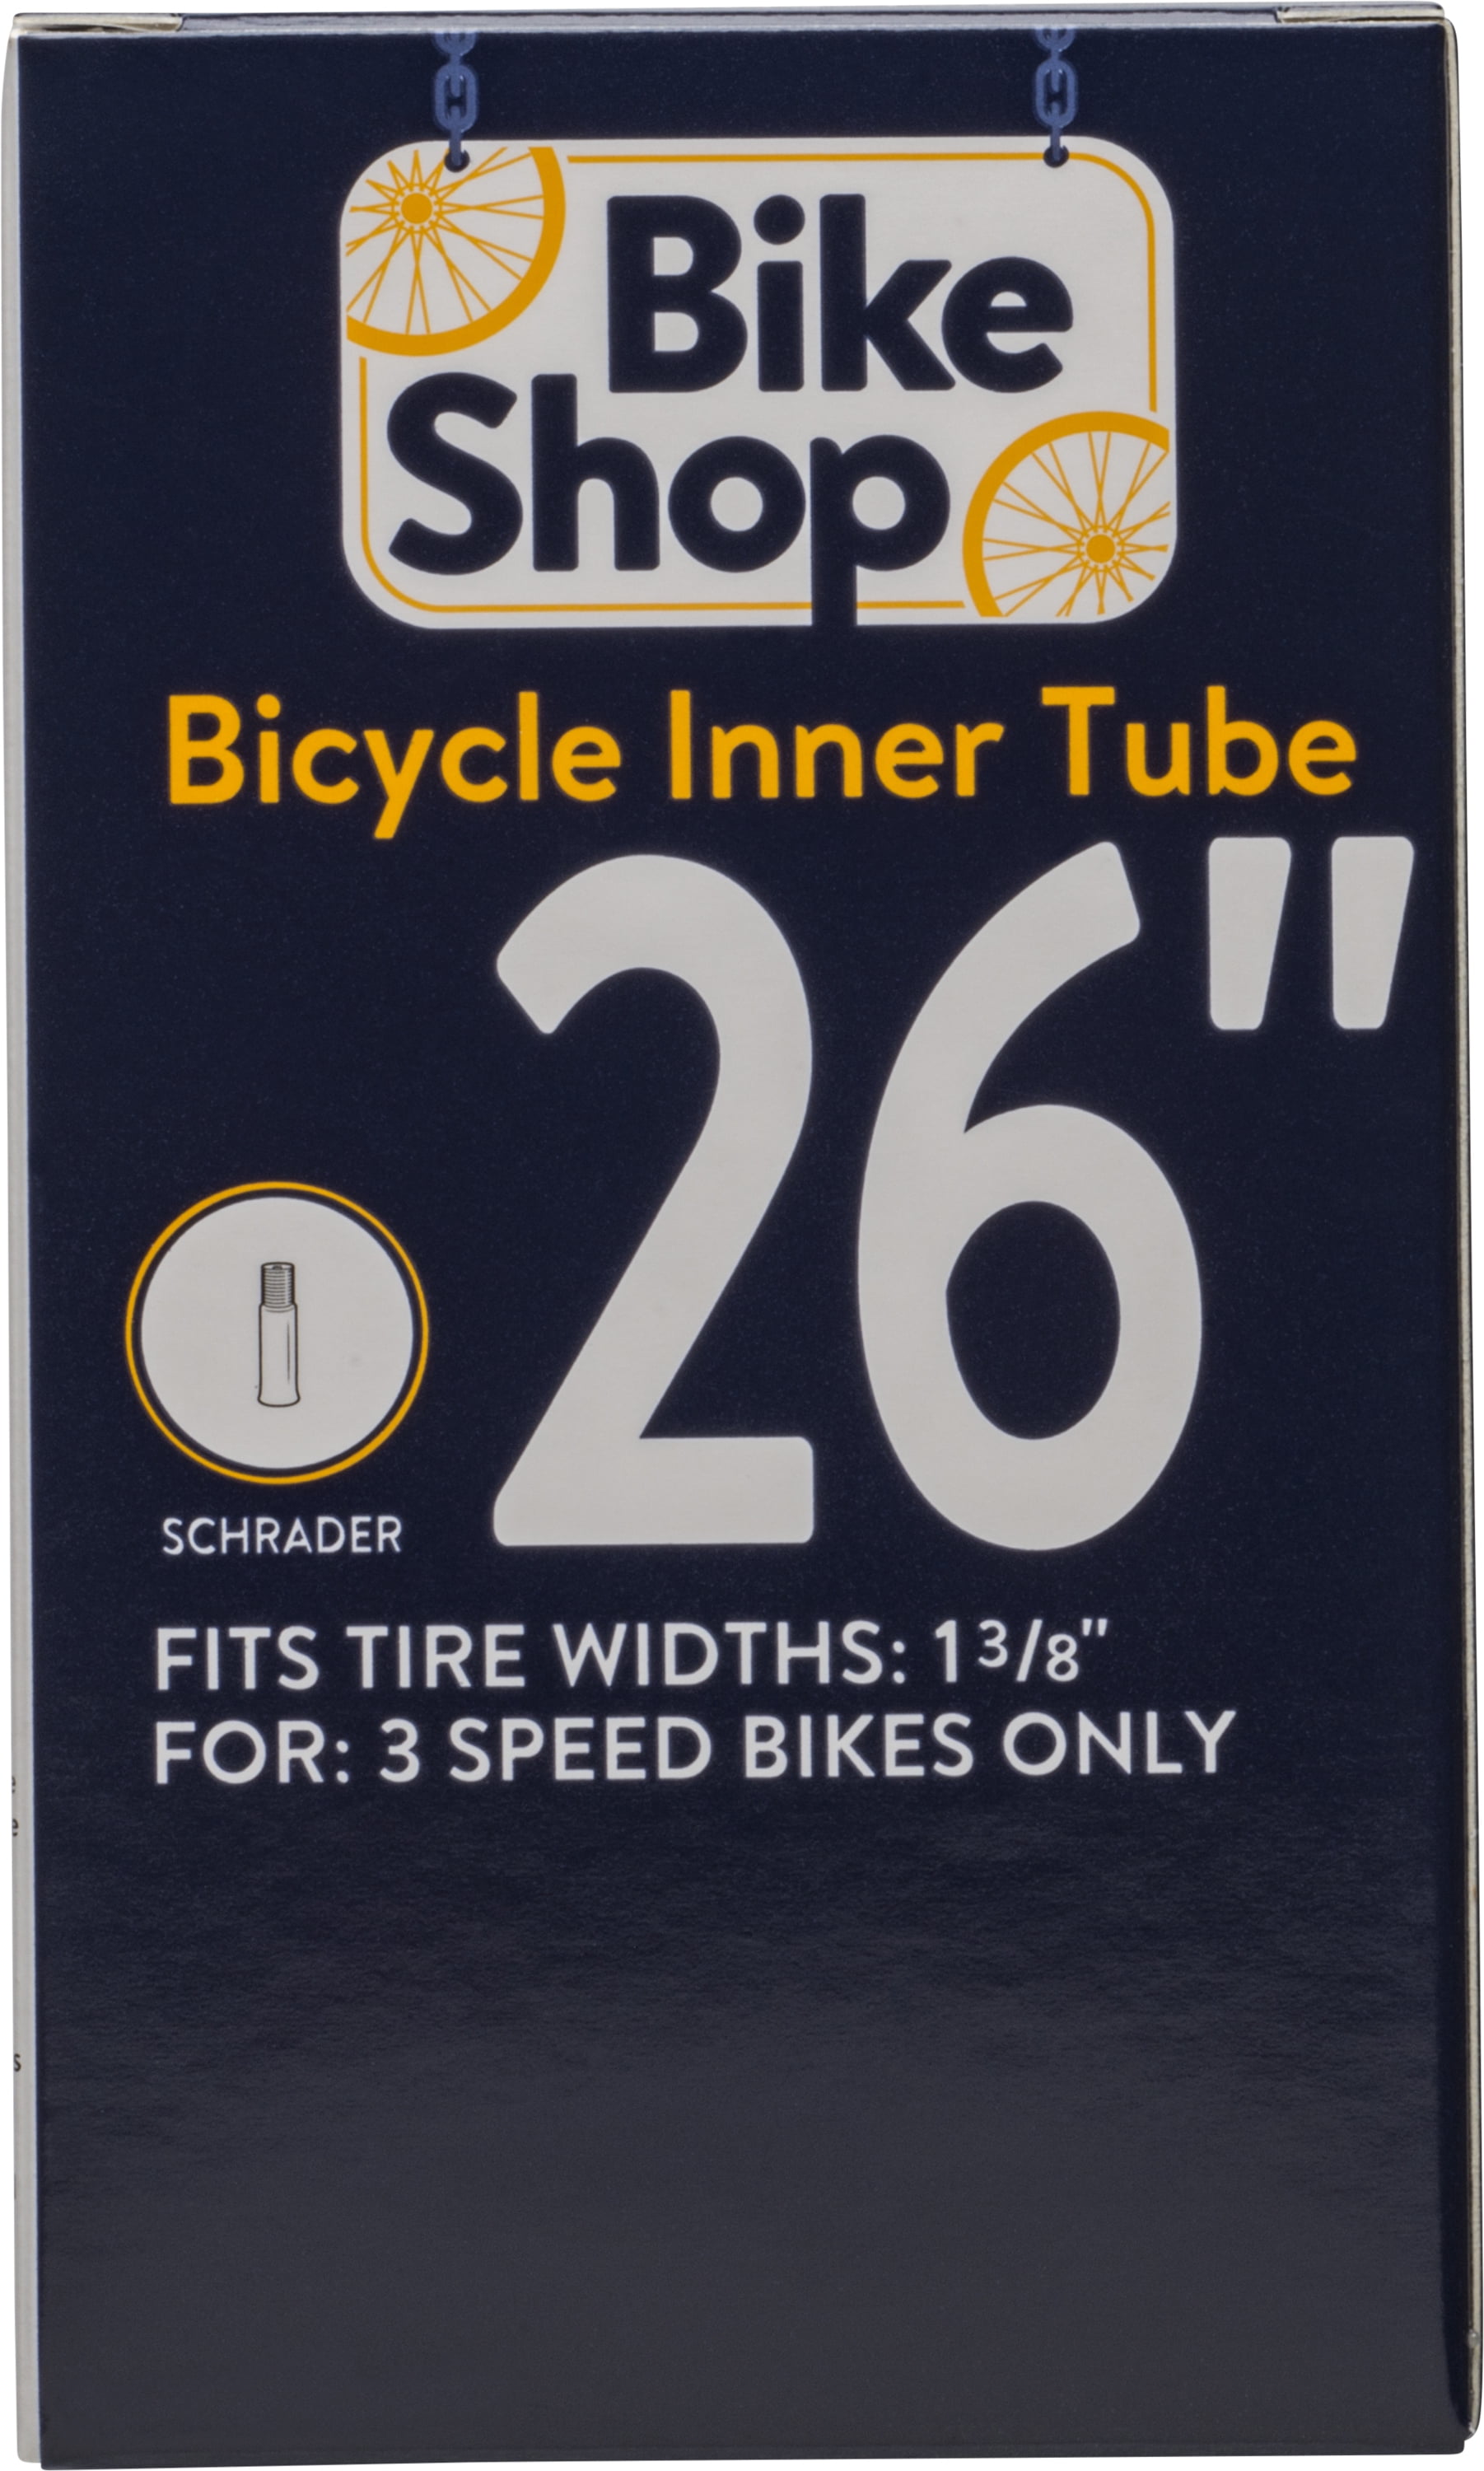 Details about   Bikextras Bicycle Inner Tube  27" X 1 1/4  495410 New in Open Box 